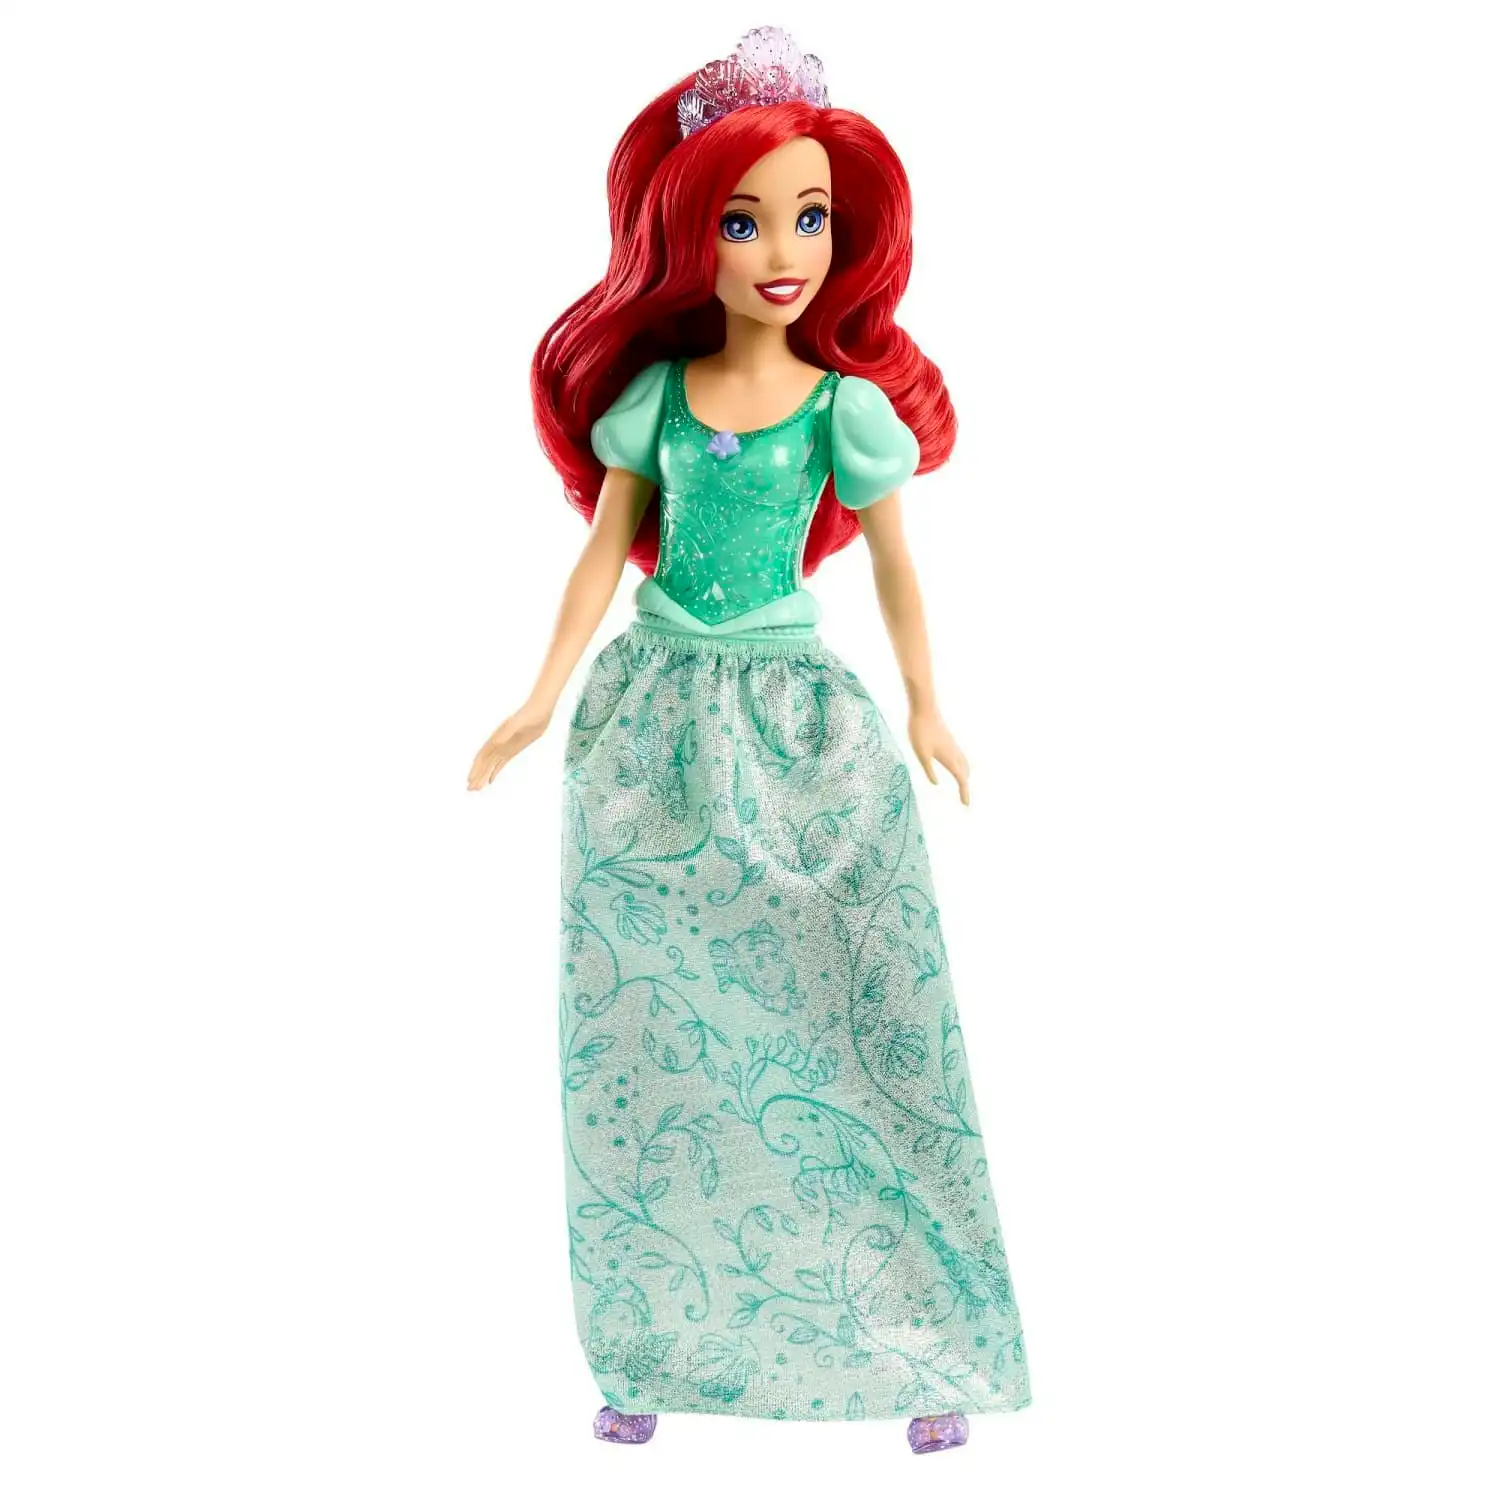 Disney Princess Ariel Fashion Doll And Accessories - New For 2023